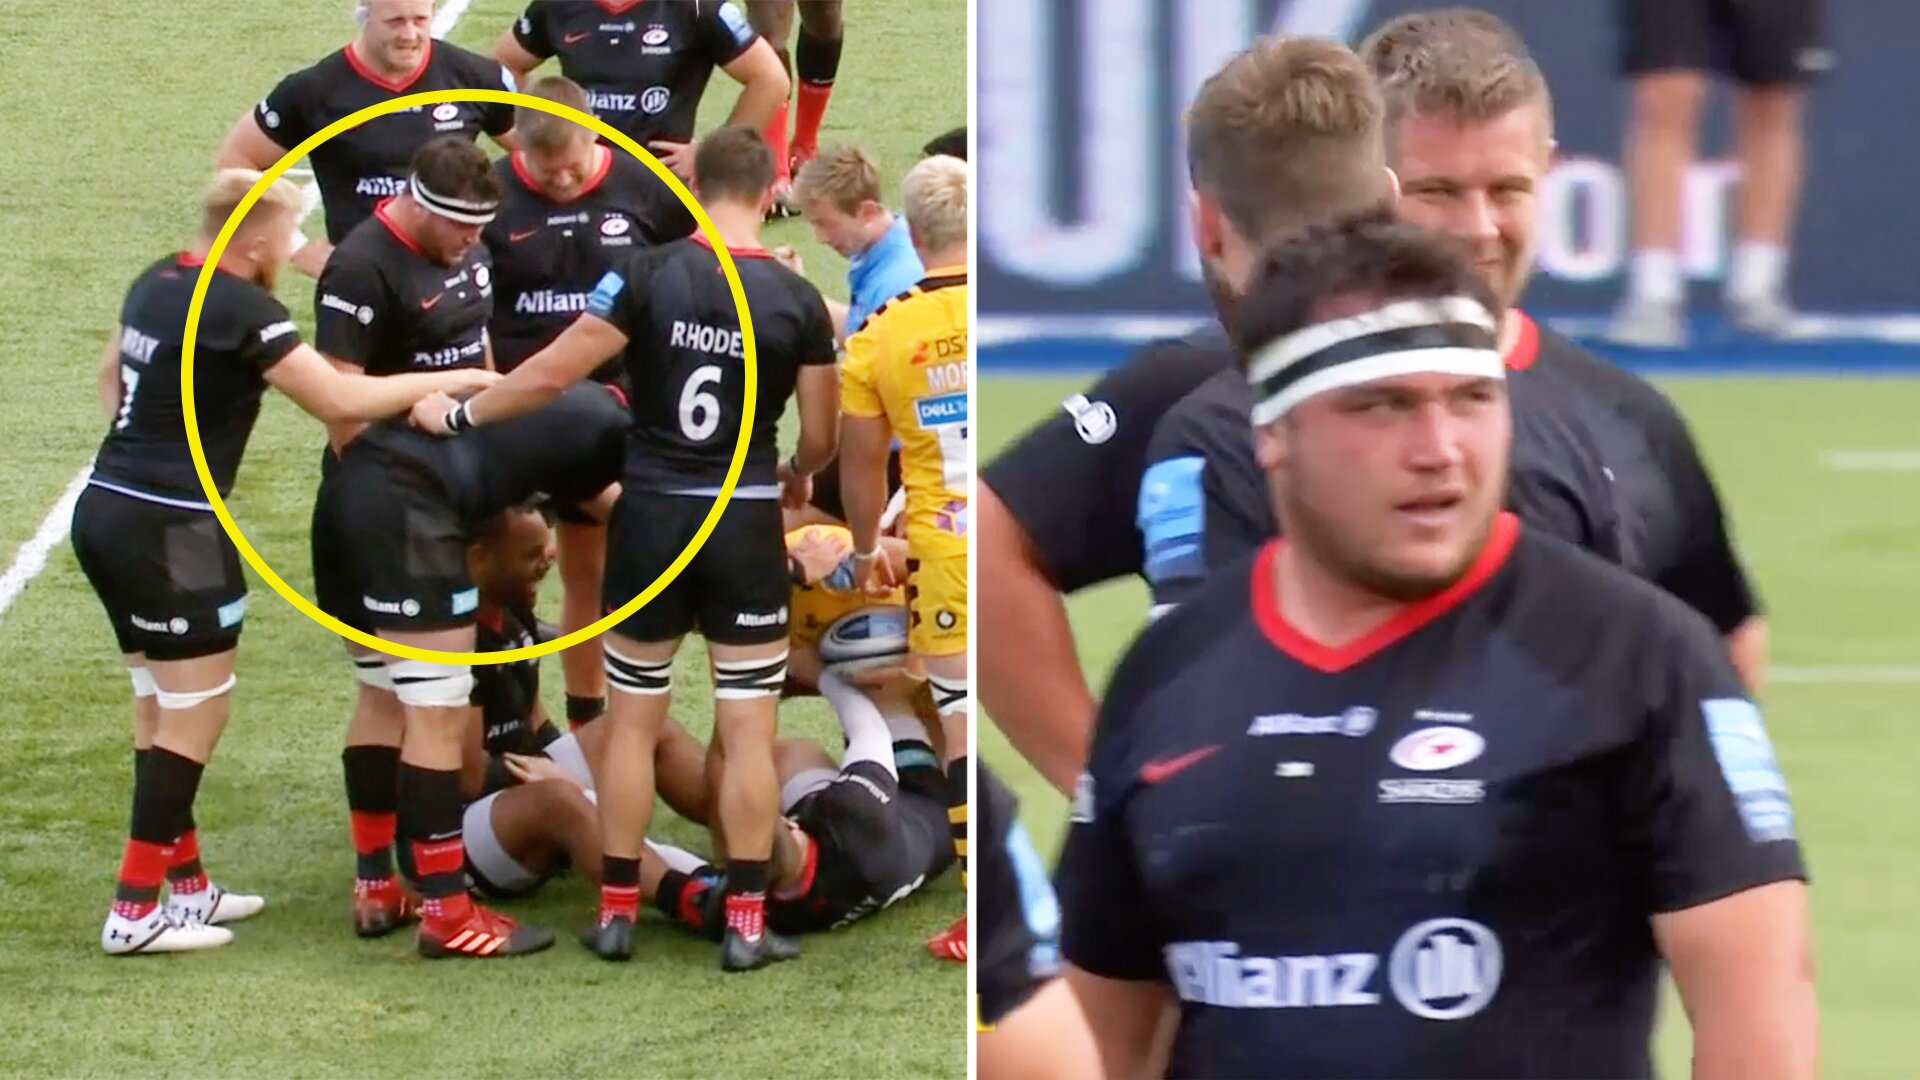 Fans in uproar as ref mic picks up Jamie George's foul mouthed verbal tirade on Wasps player